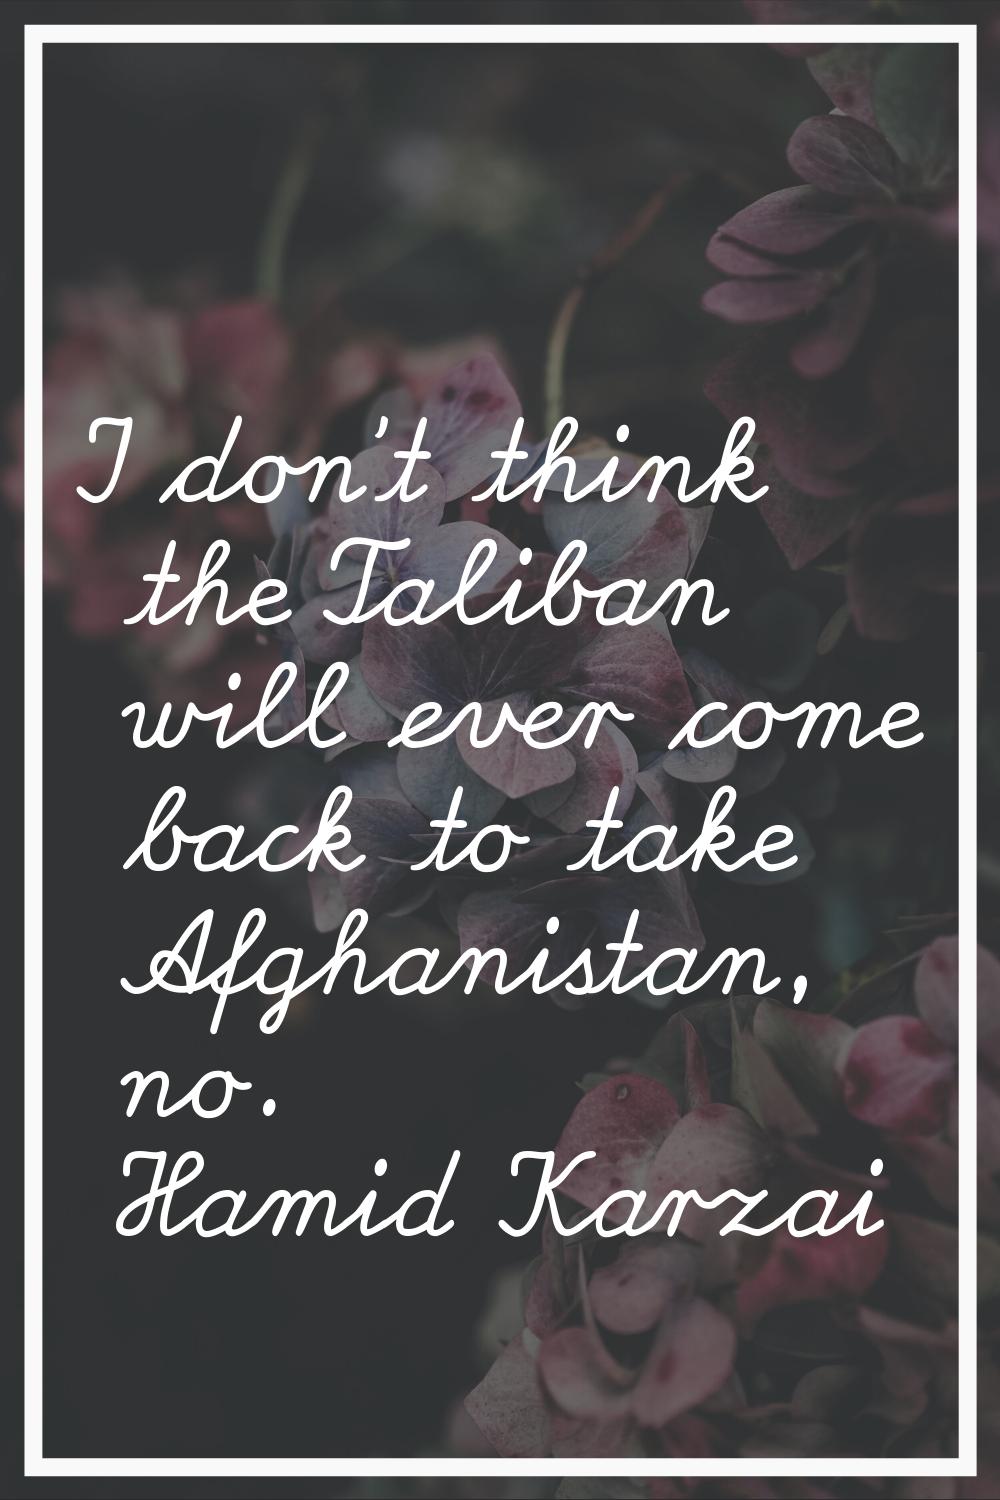 I don't think the Taliban will ever come back to take Afghanistan, no.